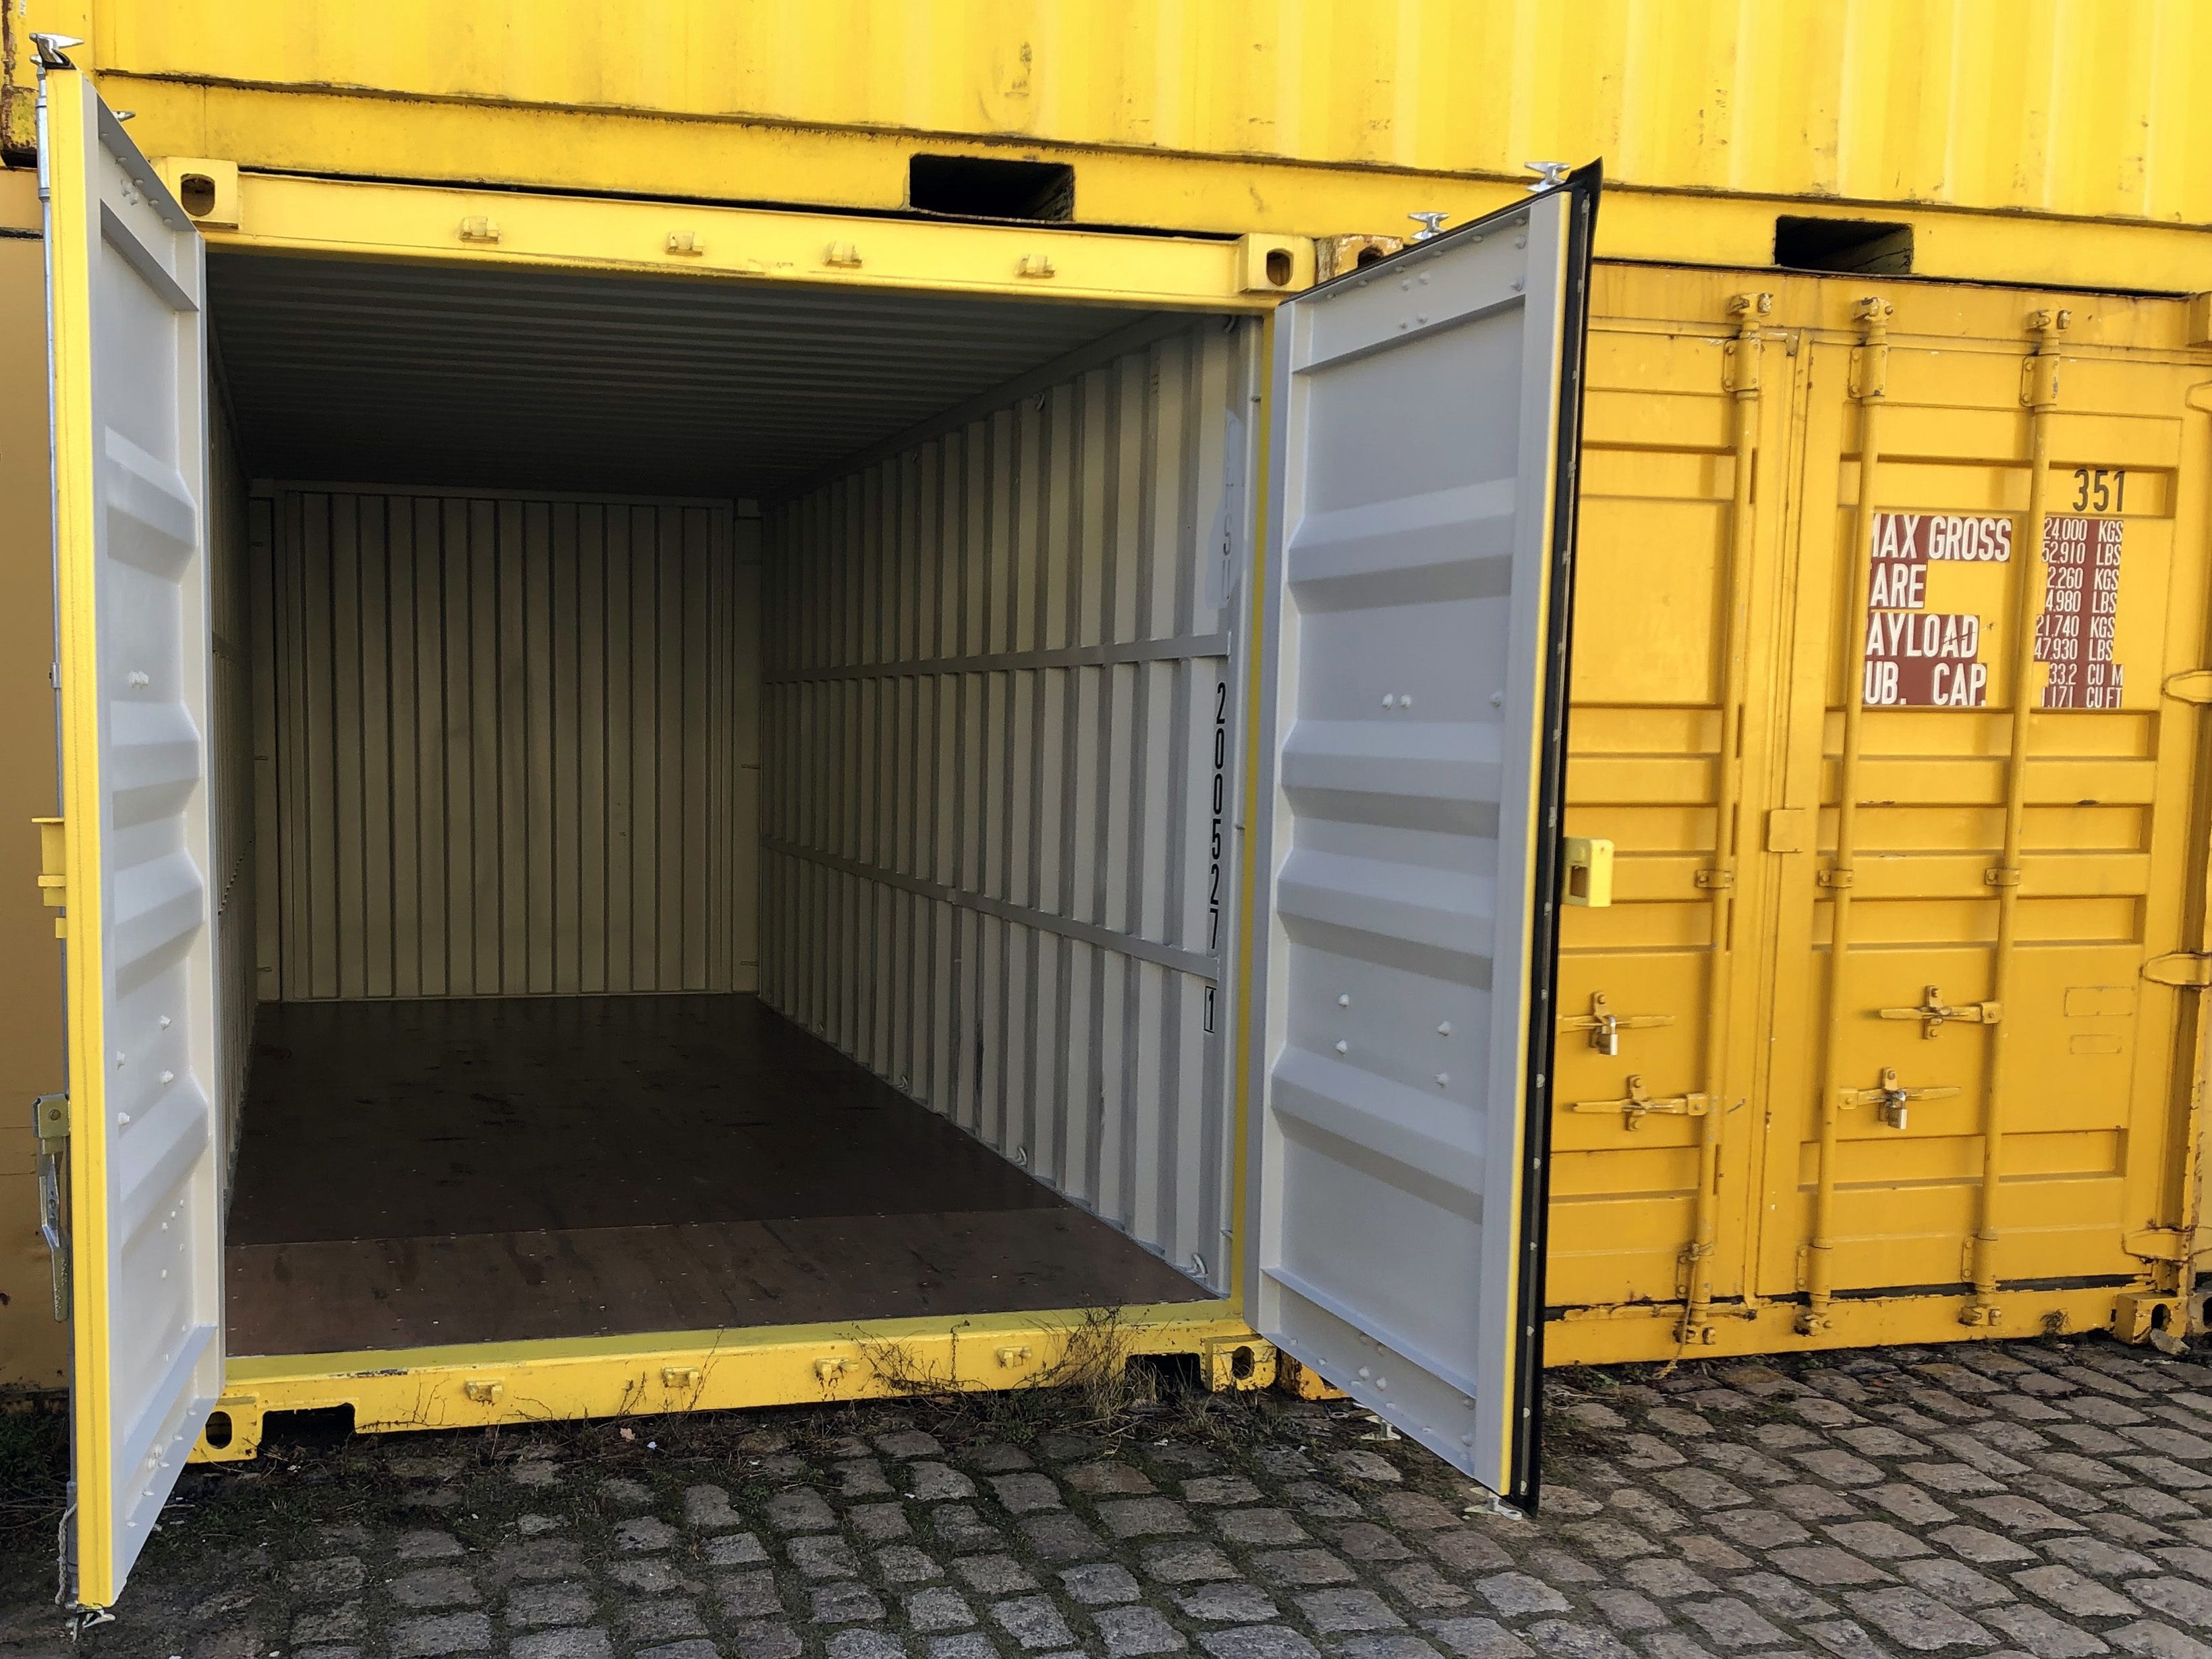 HERTLING storage container inside